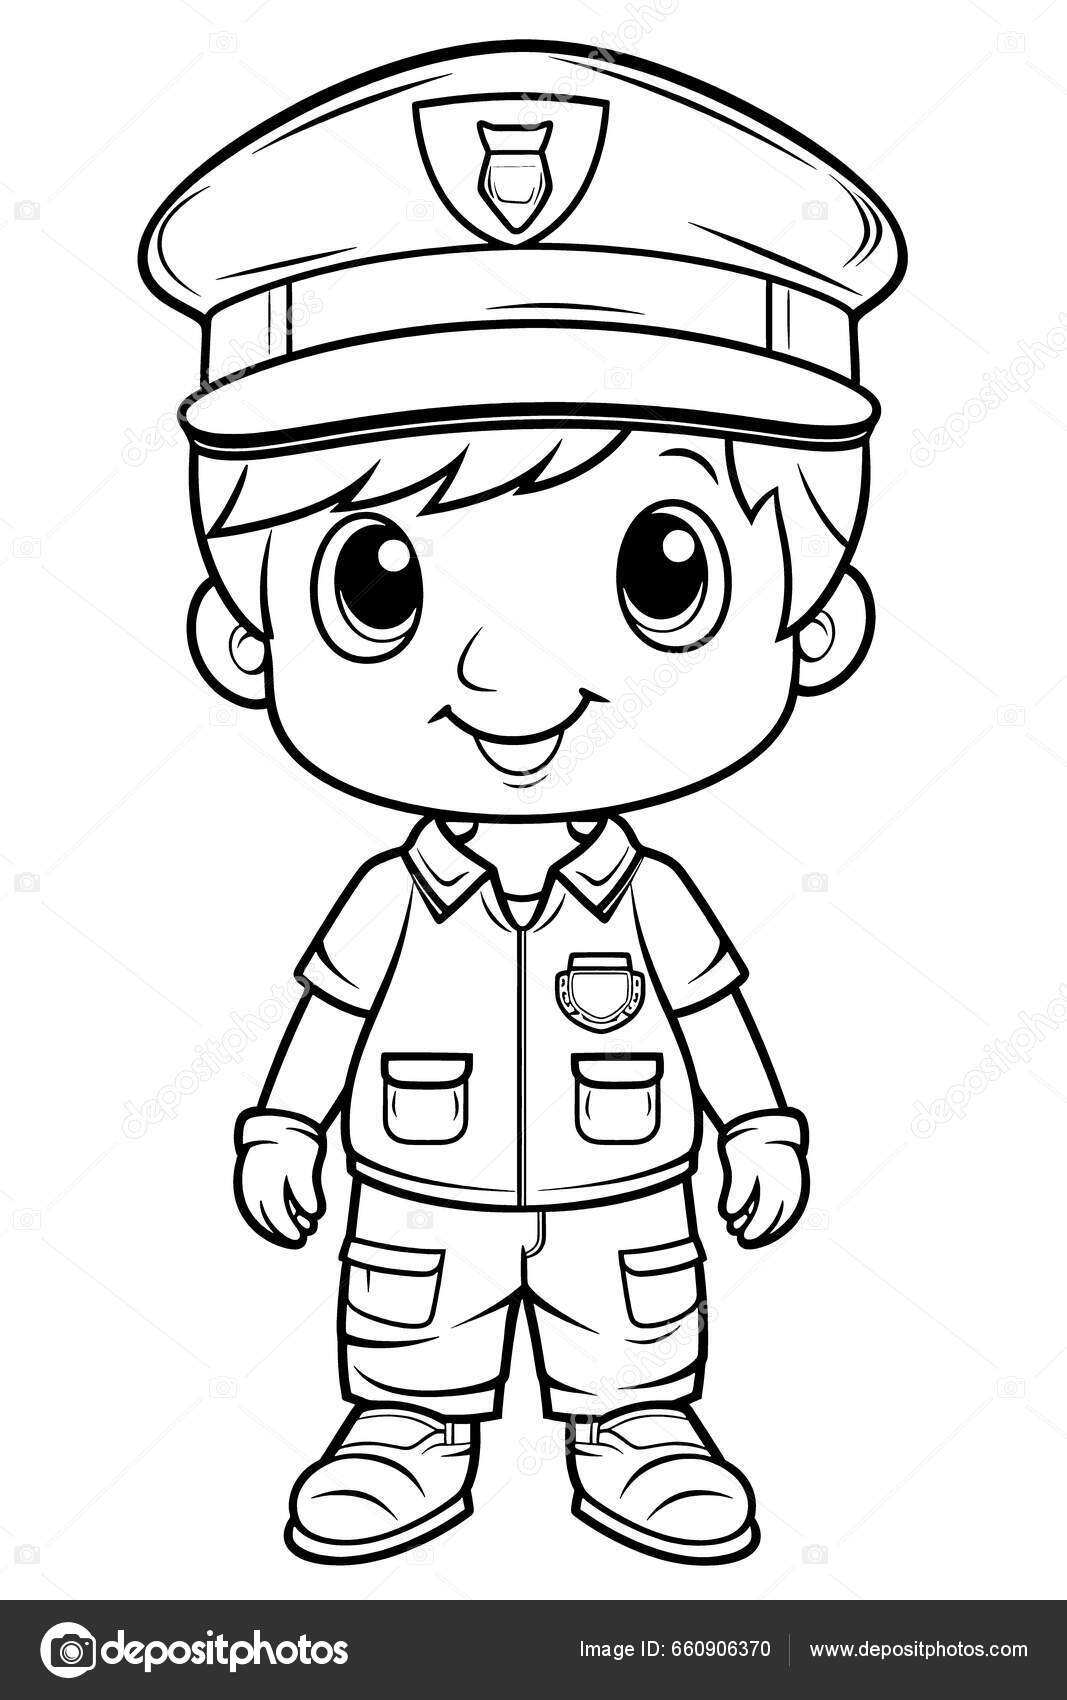 Police black white coloring pages kids simple lines cartoon style stock photo by george